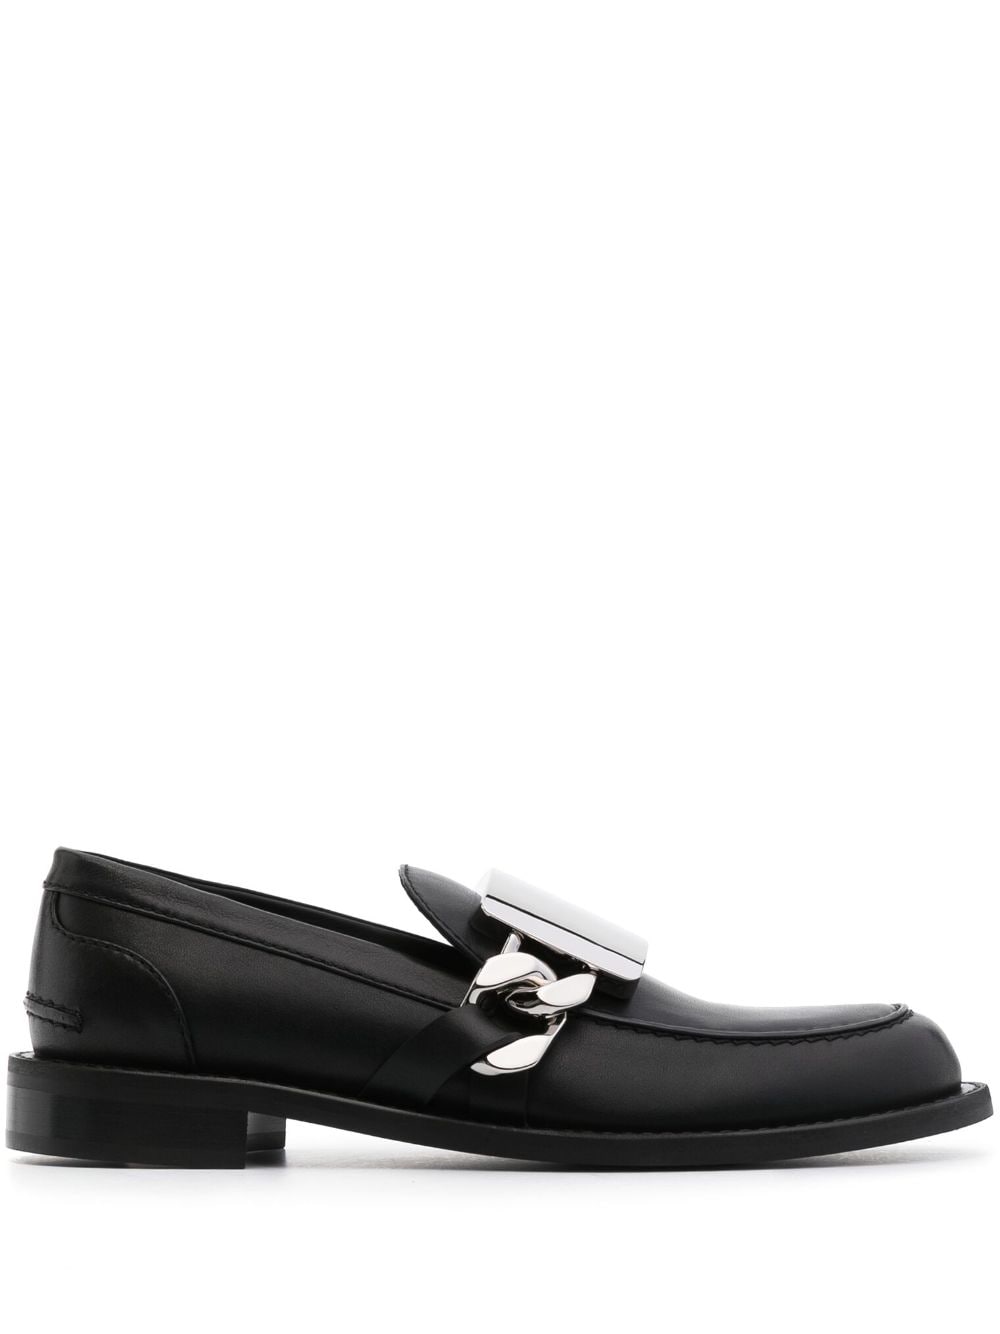 JW Anderson logo-engraved leather loafers - Black von JW Anderson